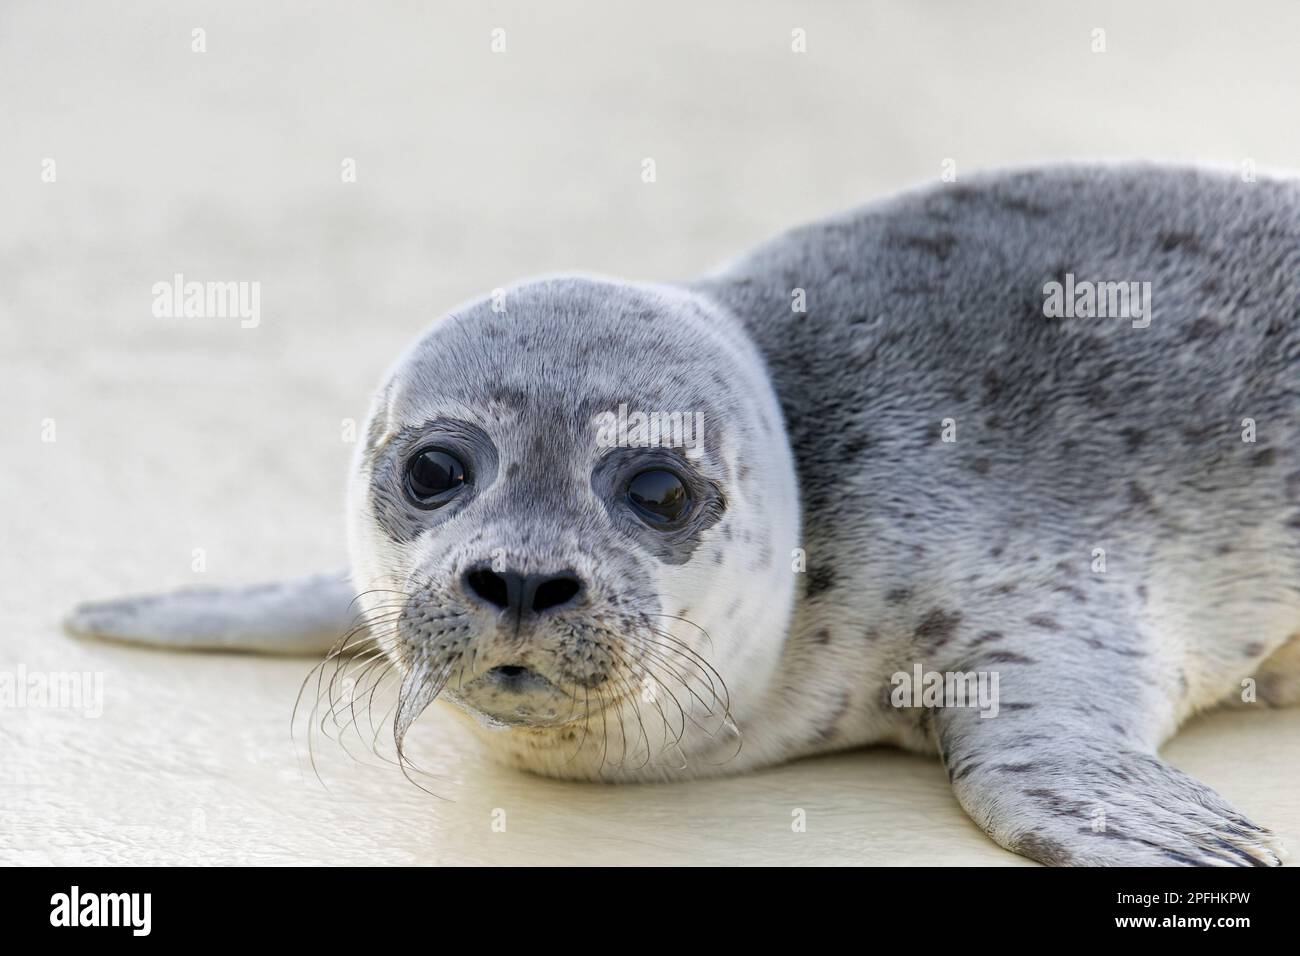 Orphaned common seal / harbour seal (Phoca vitulina) orphan pup at the Friedrichskoog Seal Station at Dithmarschen, Schleswig-Holstein, Germany Stock Photo